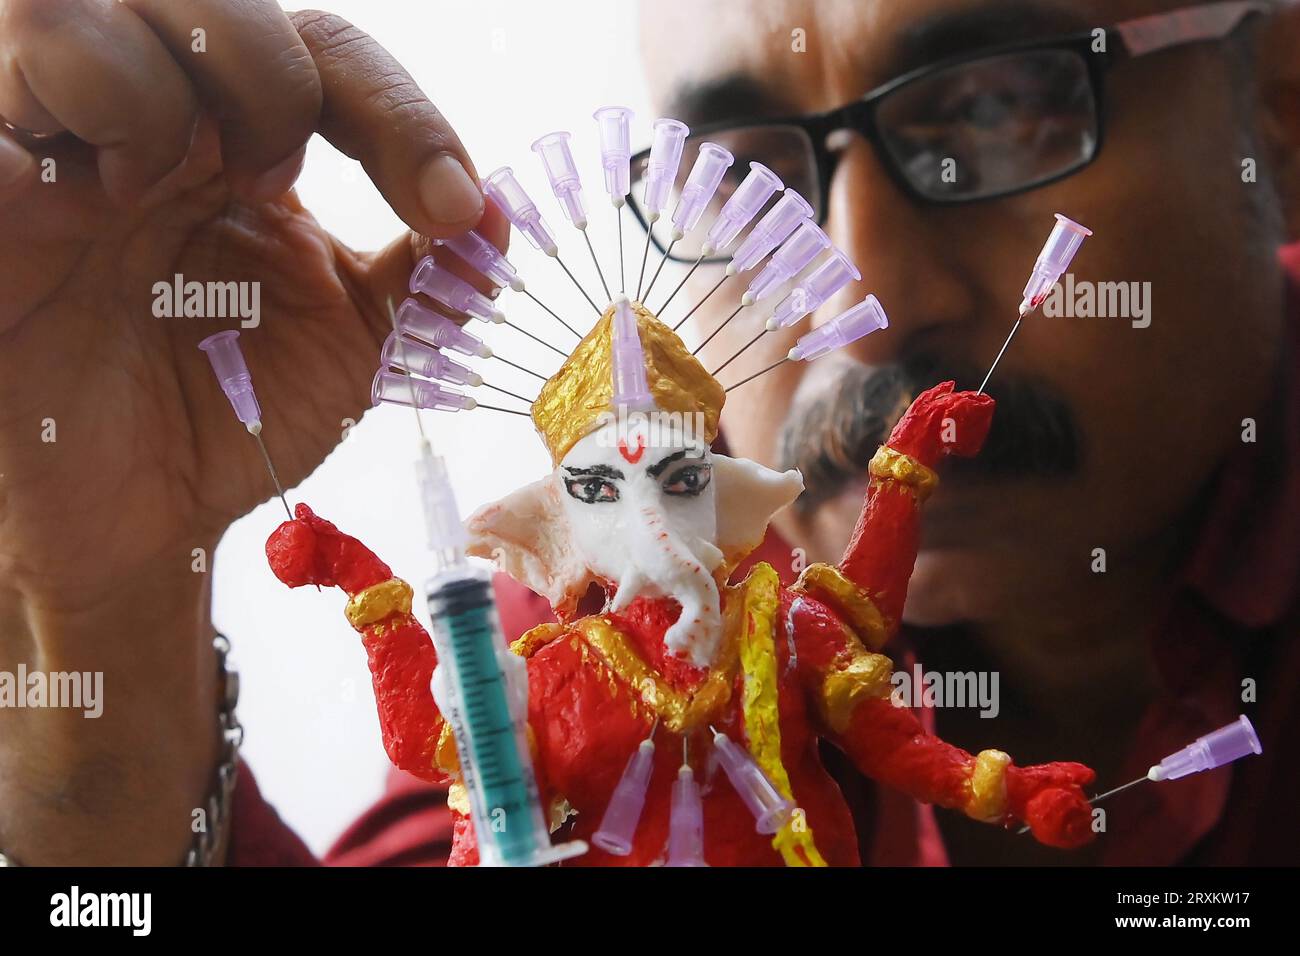 Samiran De, an artist works on an idol of Lord Ganesha made with soup and syringe needles to alert people against drugs, ahead of Ganesh Chaturthi festival, in Agartala. Tripura, India. Stock Photo